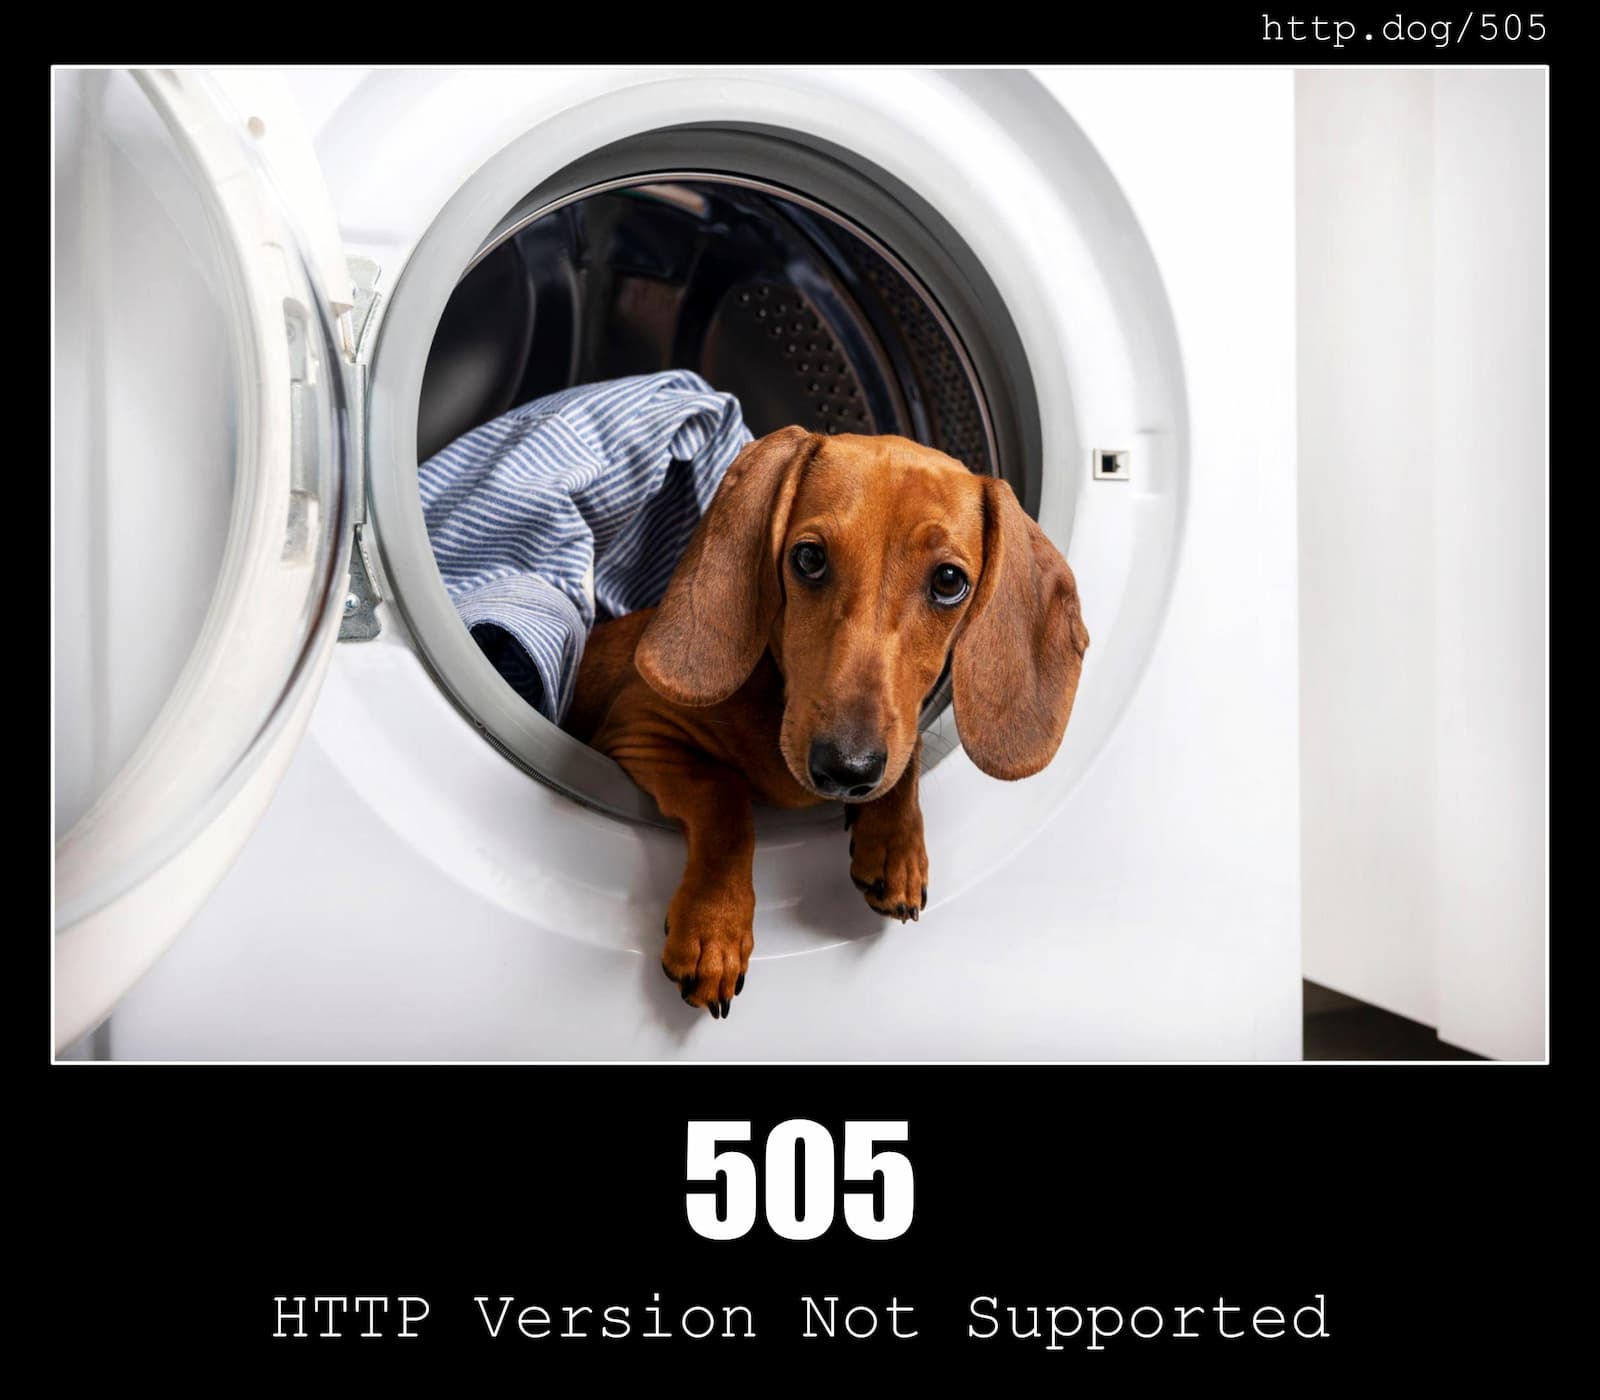 HTTP Status Code 505 HTTP Version Not Supported & Dogs